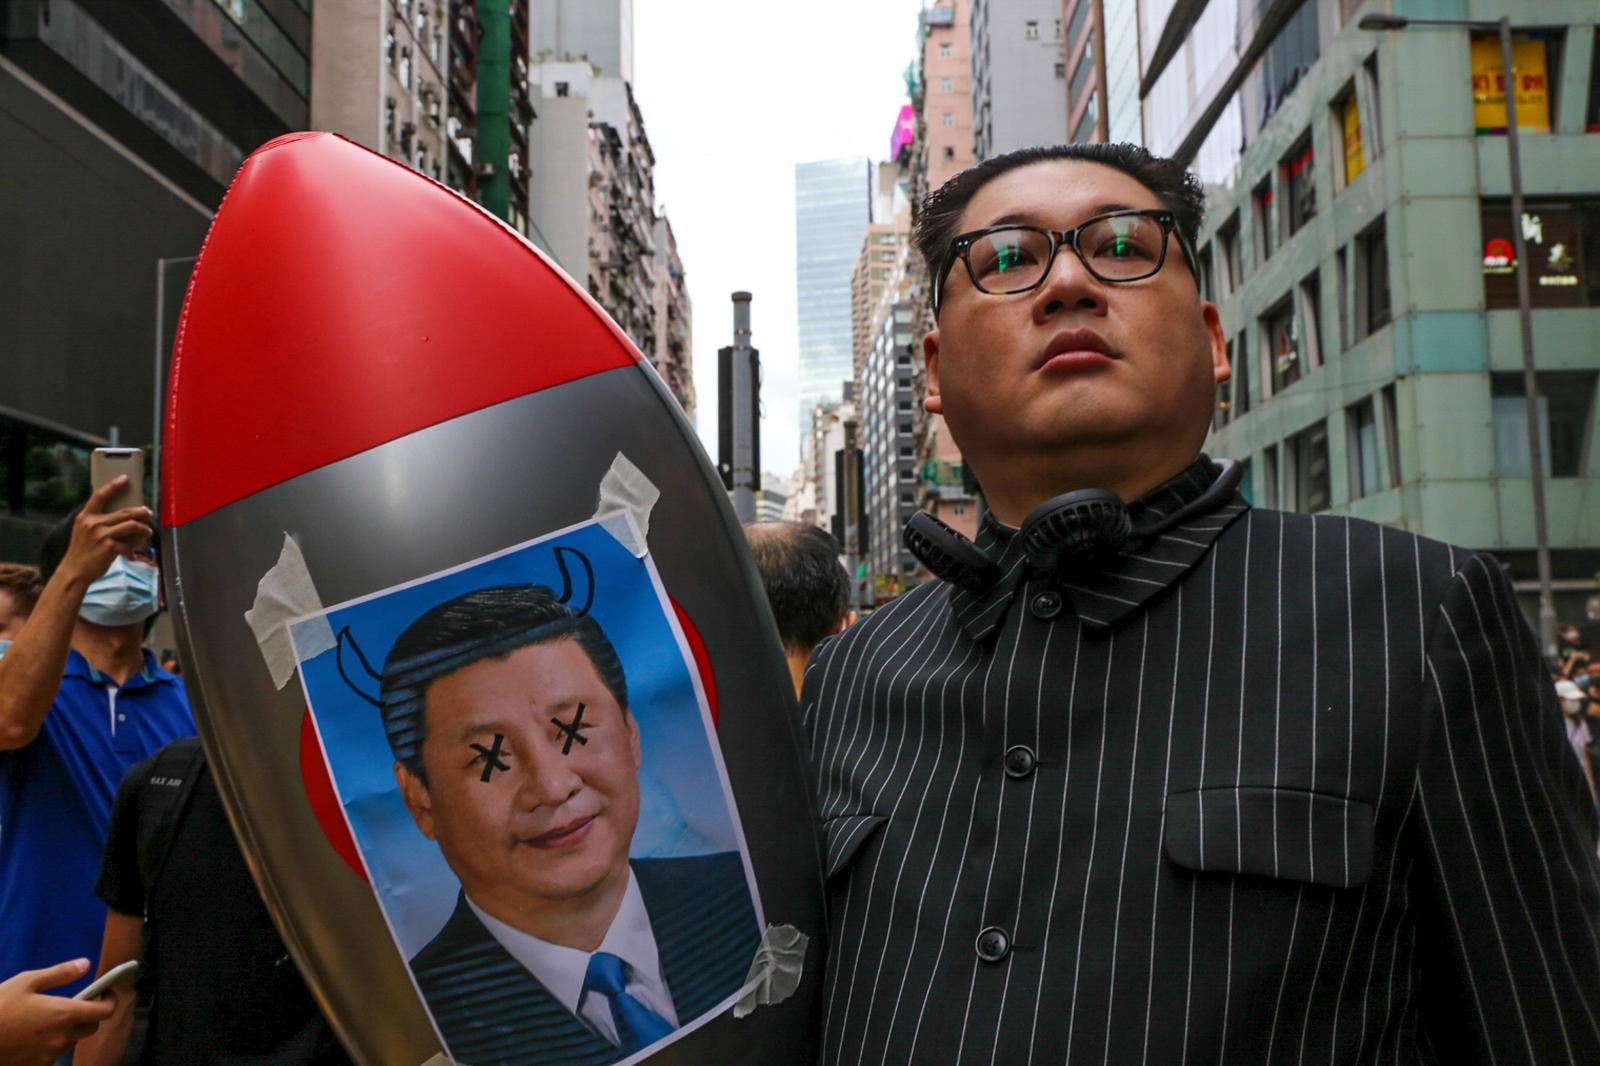 Howard X, a Kim Jung Un impersonator, holds a plstic blow-up missile with a photo of Xi Jinping. On the first day of the passing of the National Security Law, thousands came out to protest in defiance. Composed of 66 articles that redefine acts of secession, subversion, terrorism, and foreign collusion, acts such as this can be punishable up to life imprisonment.